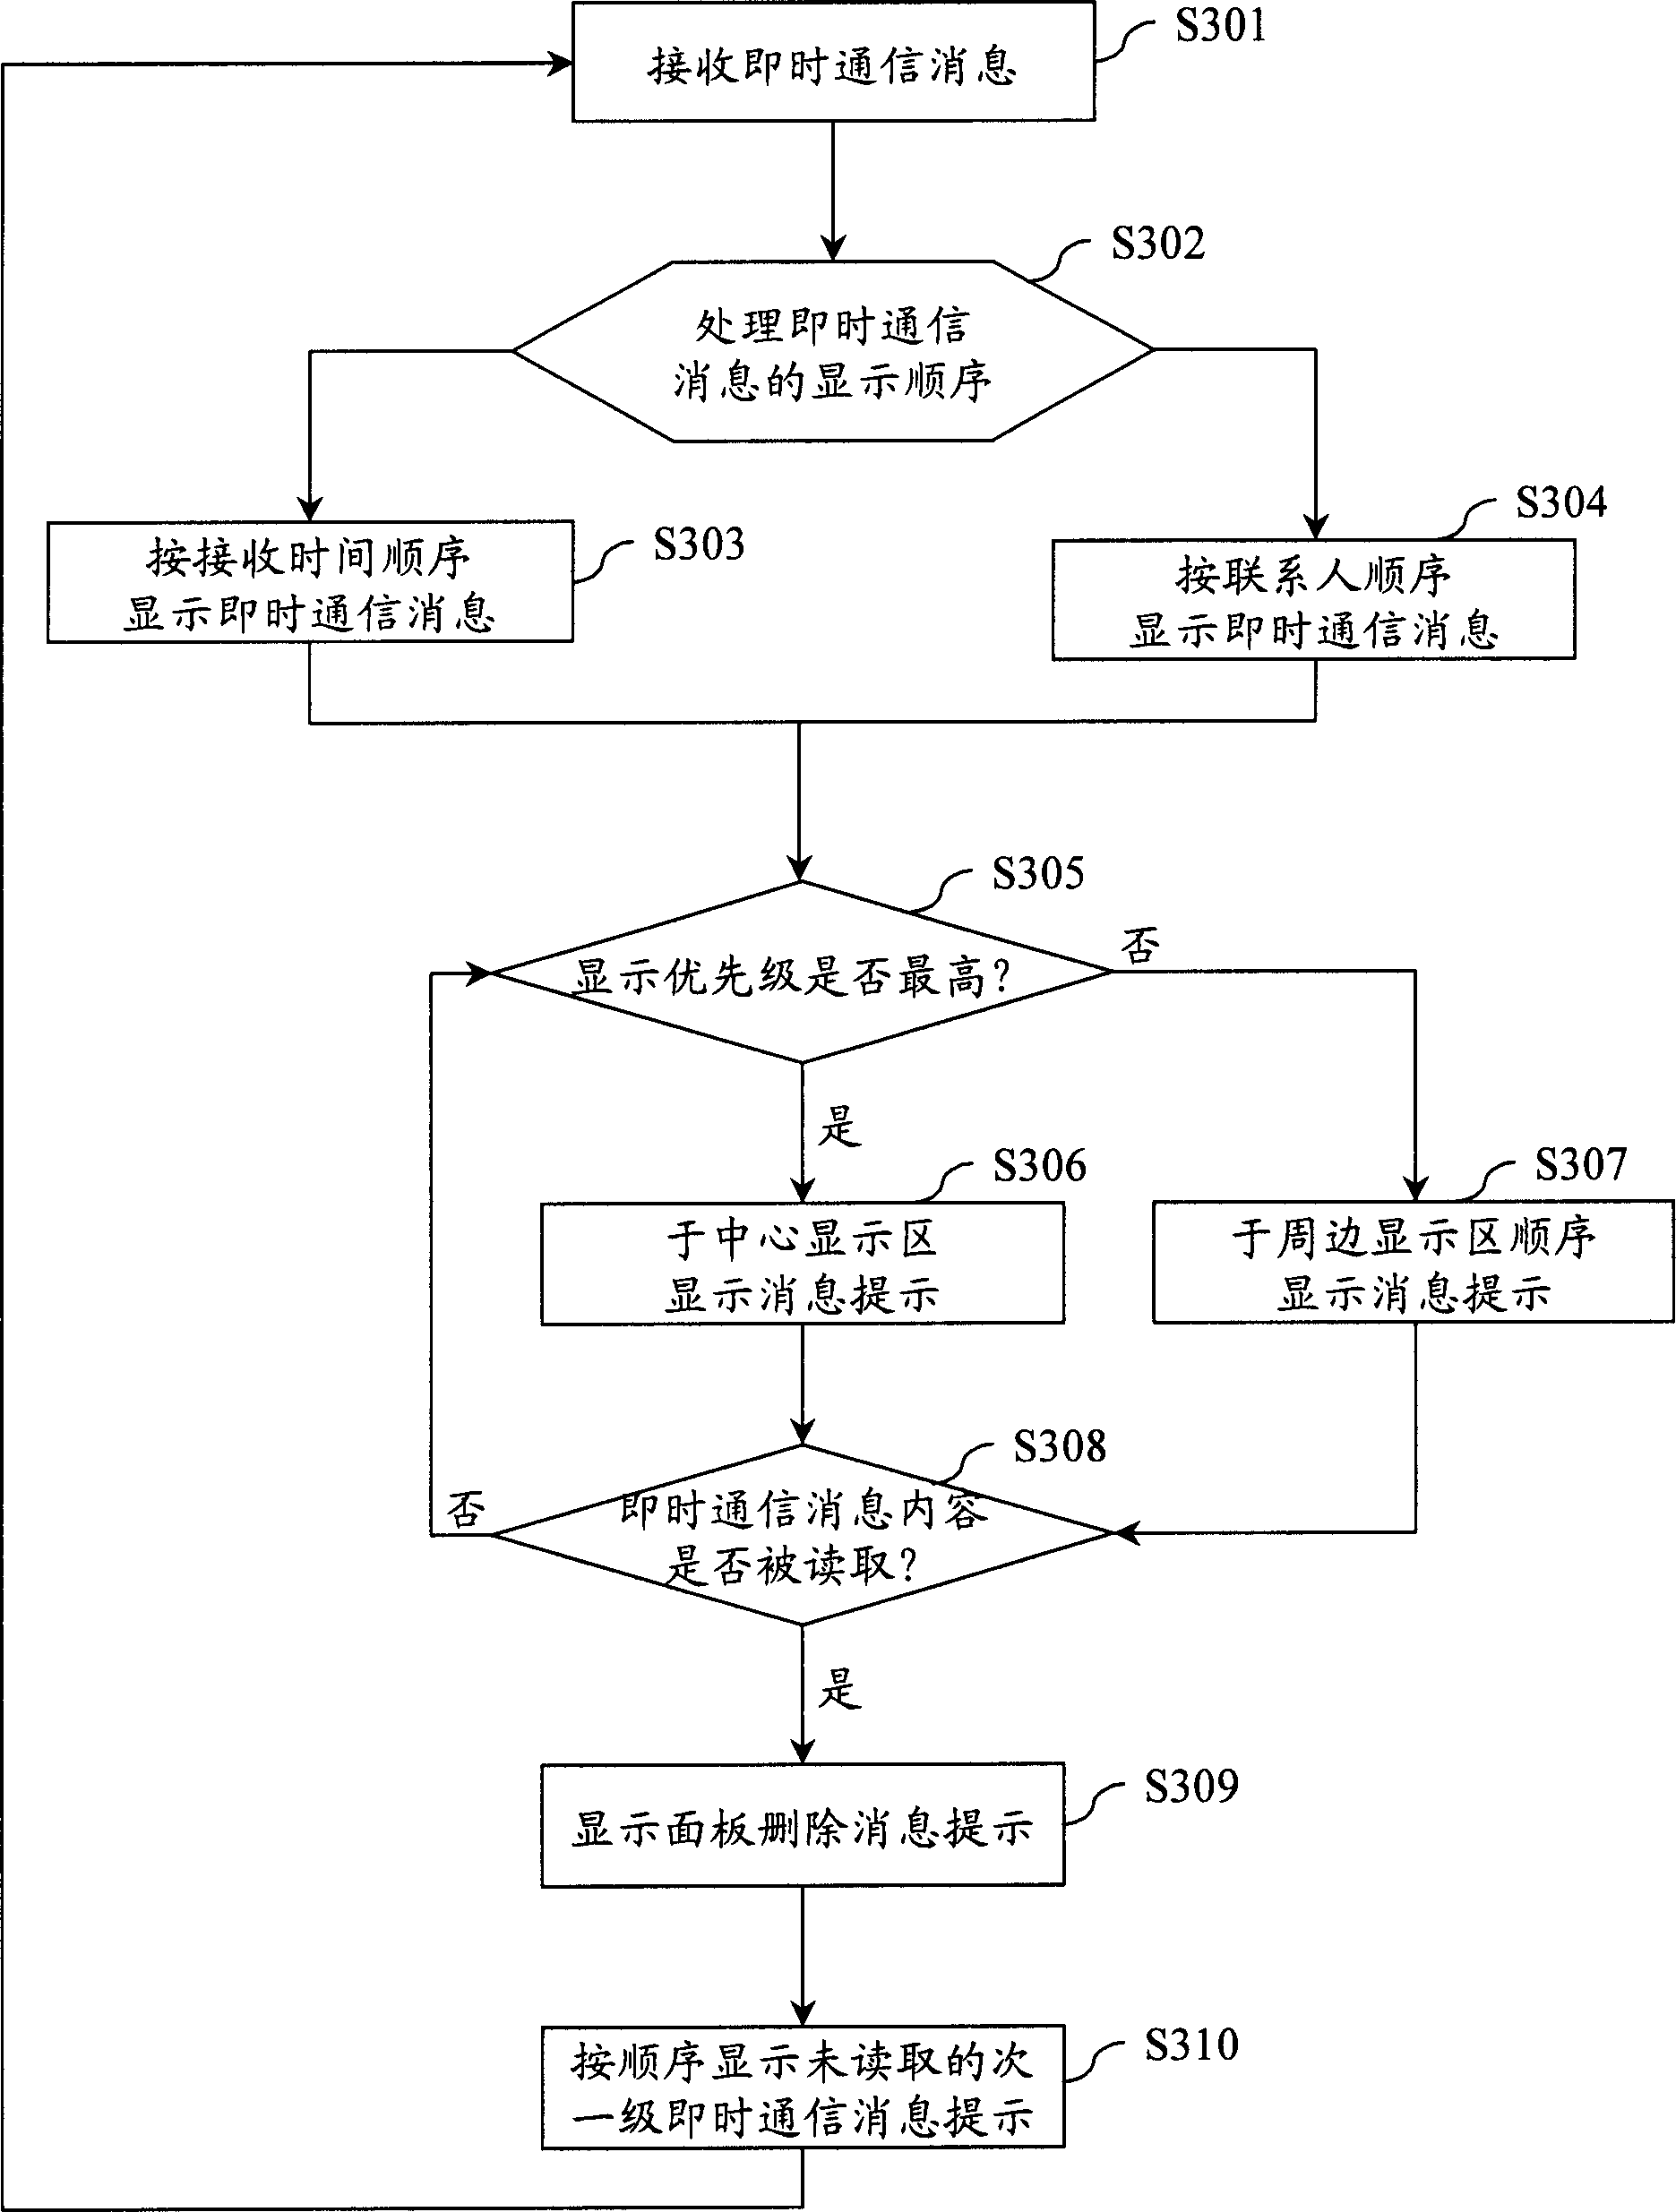 Instant communication message display managing system, method and display interface thereof